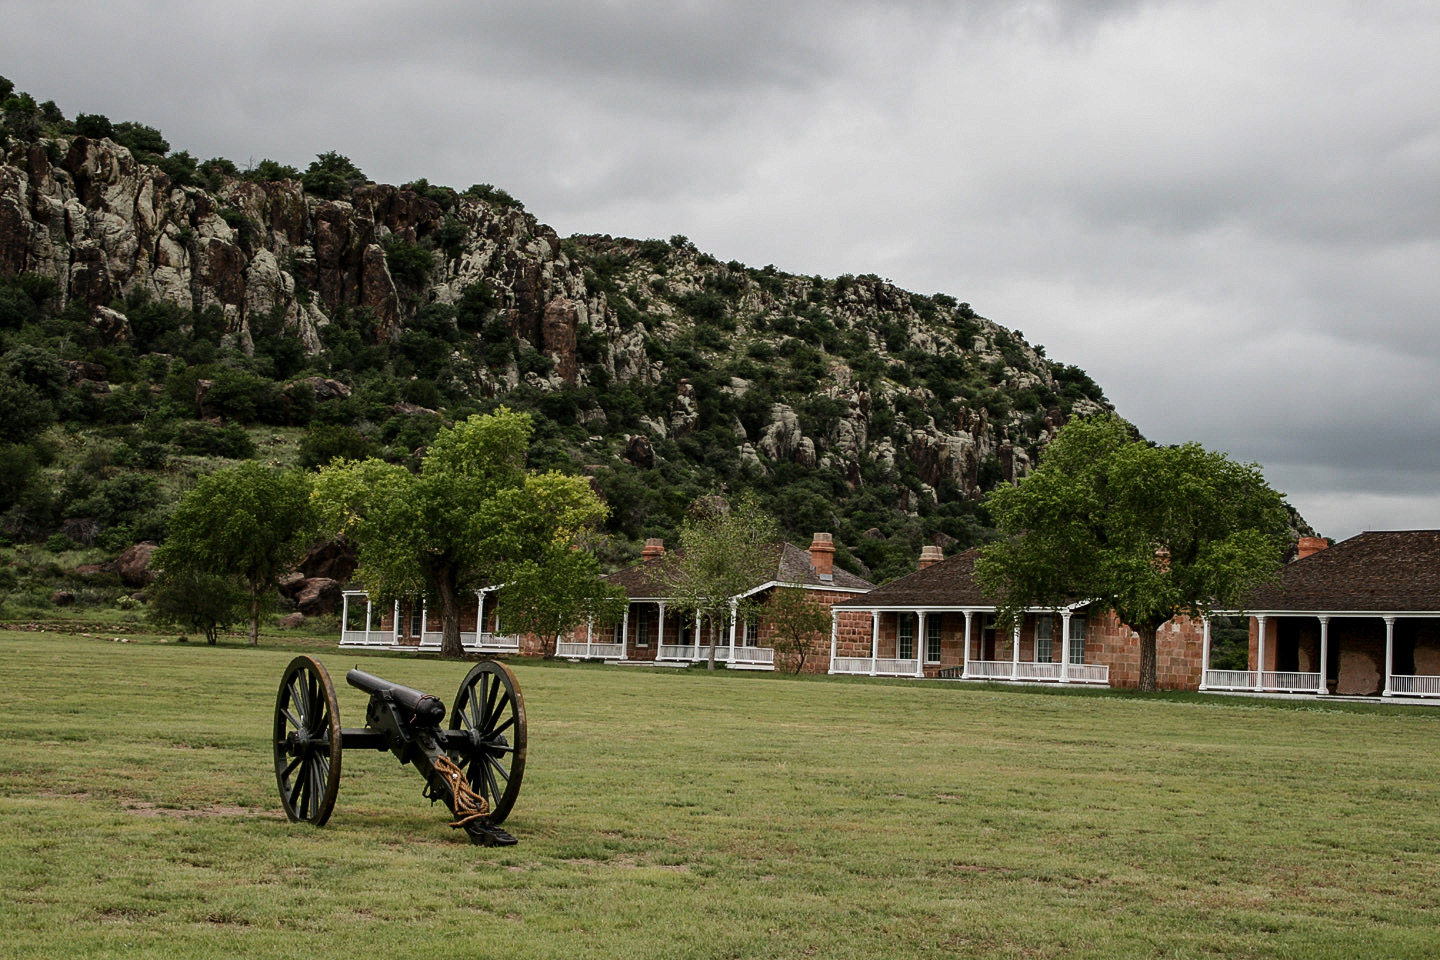 Nature, hiking, history make Fort Davis a top spot for Texas